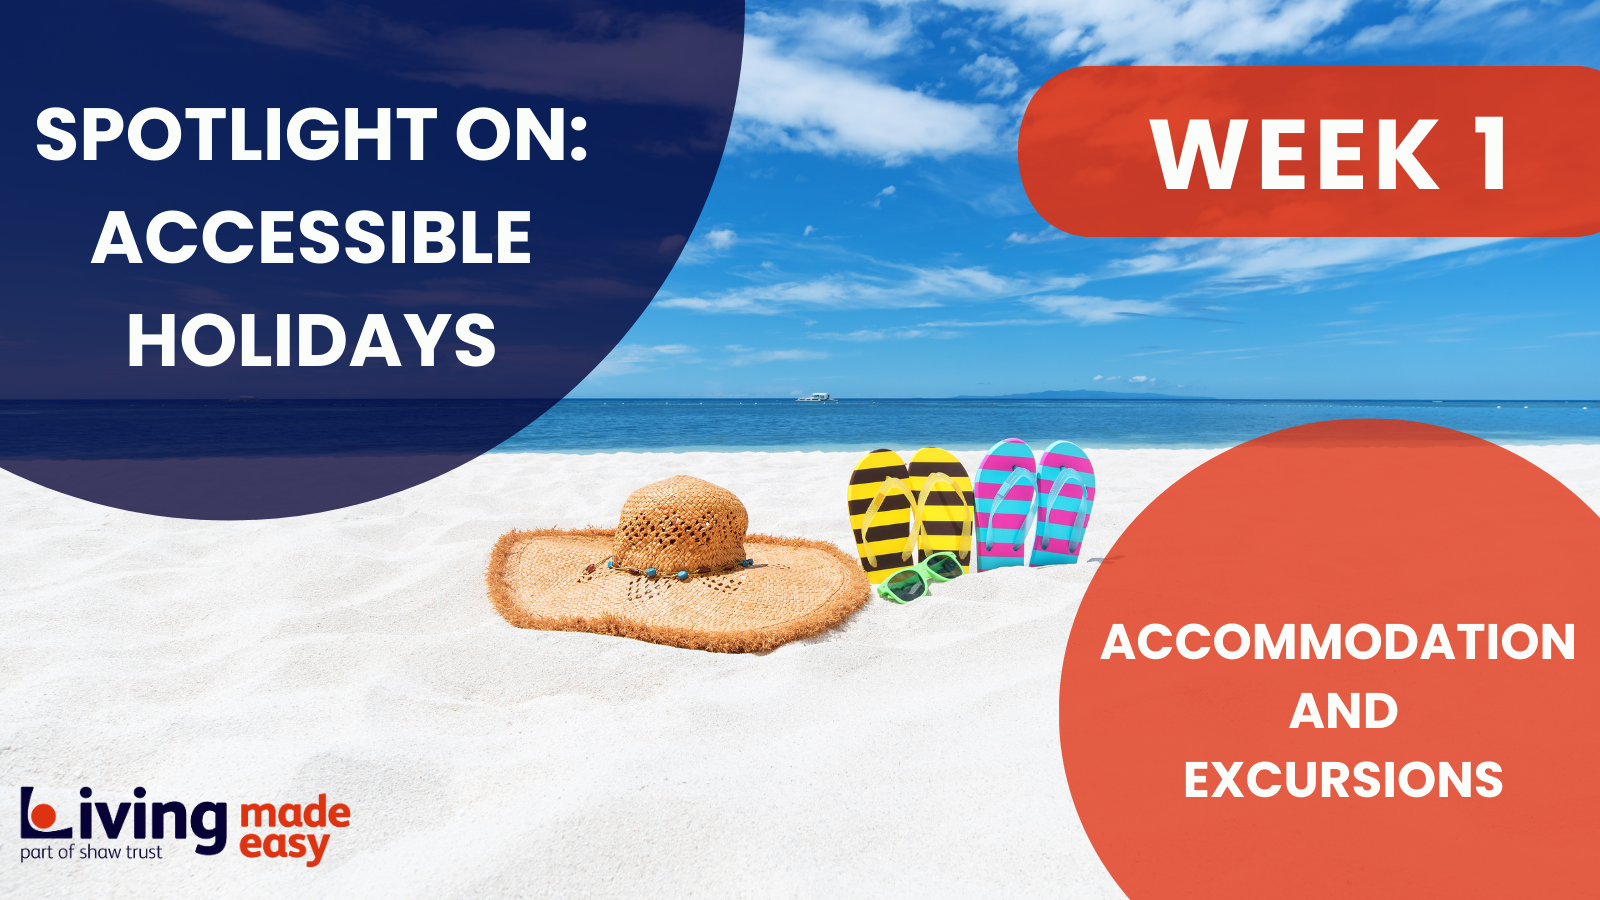 A banner image of a straw sun hat, flip-flops and sunglasses on a white sandy beach. The sea is in the background. The banner reads Spotlight On: Accessible Holidays, Week 1, Accommodation and Excursions